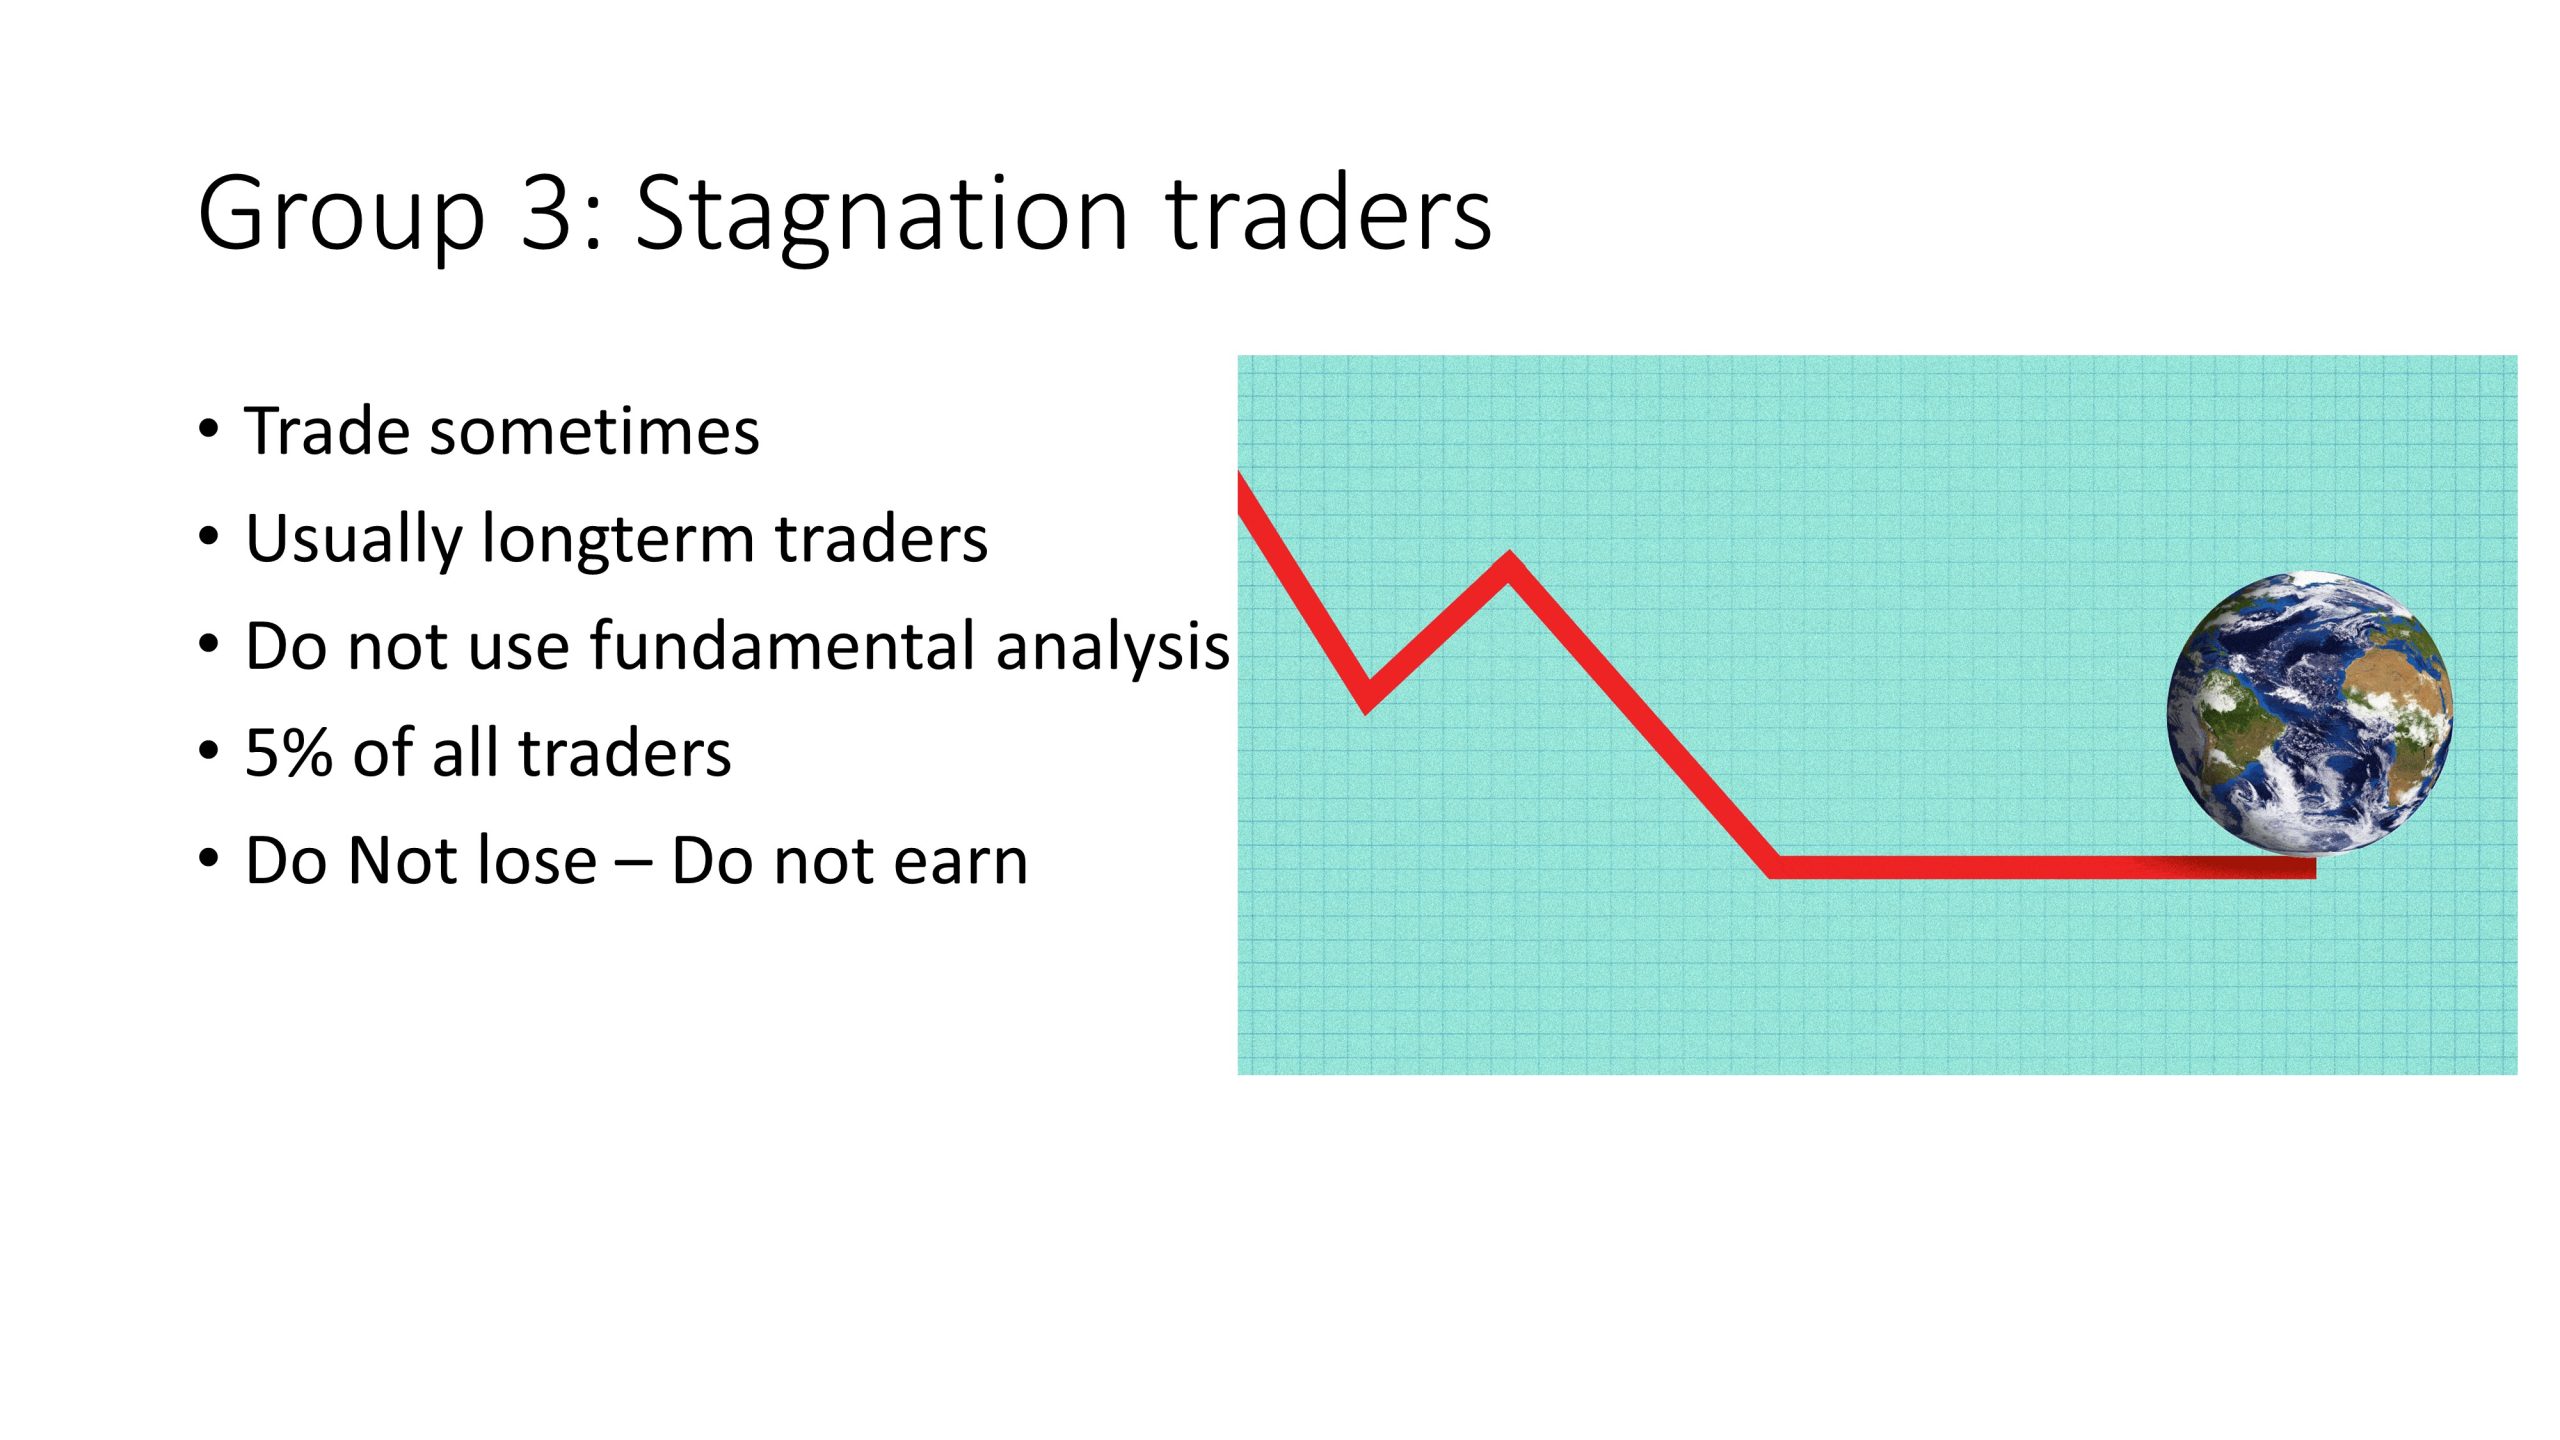 Stagnation traders